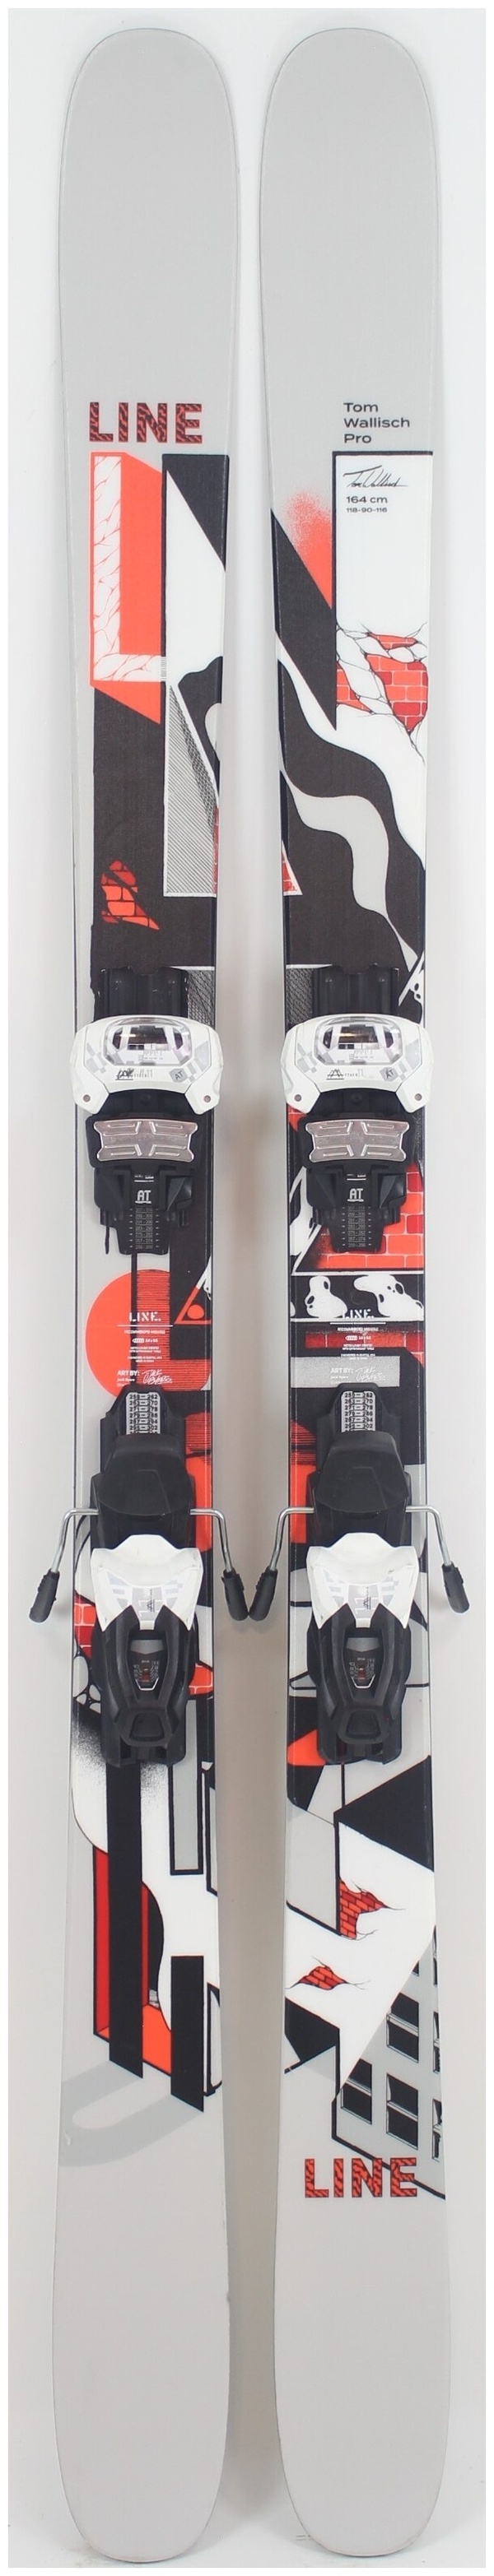 2021, Line, Tom Wallisch Pro Skis with Tyrolia Attack 11 AT Demo Bindings  Used Demo Skis 164cm